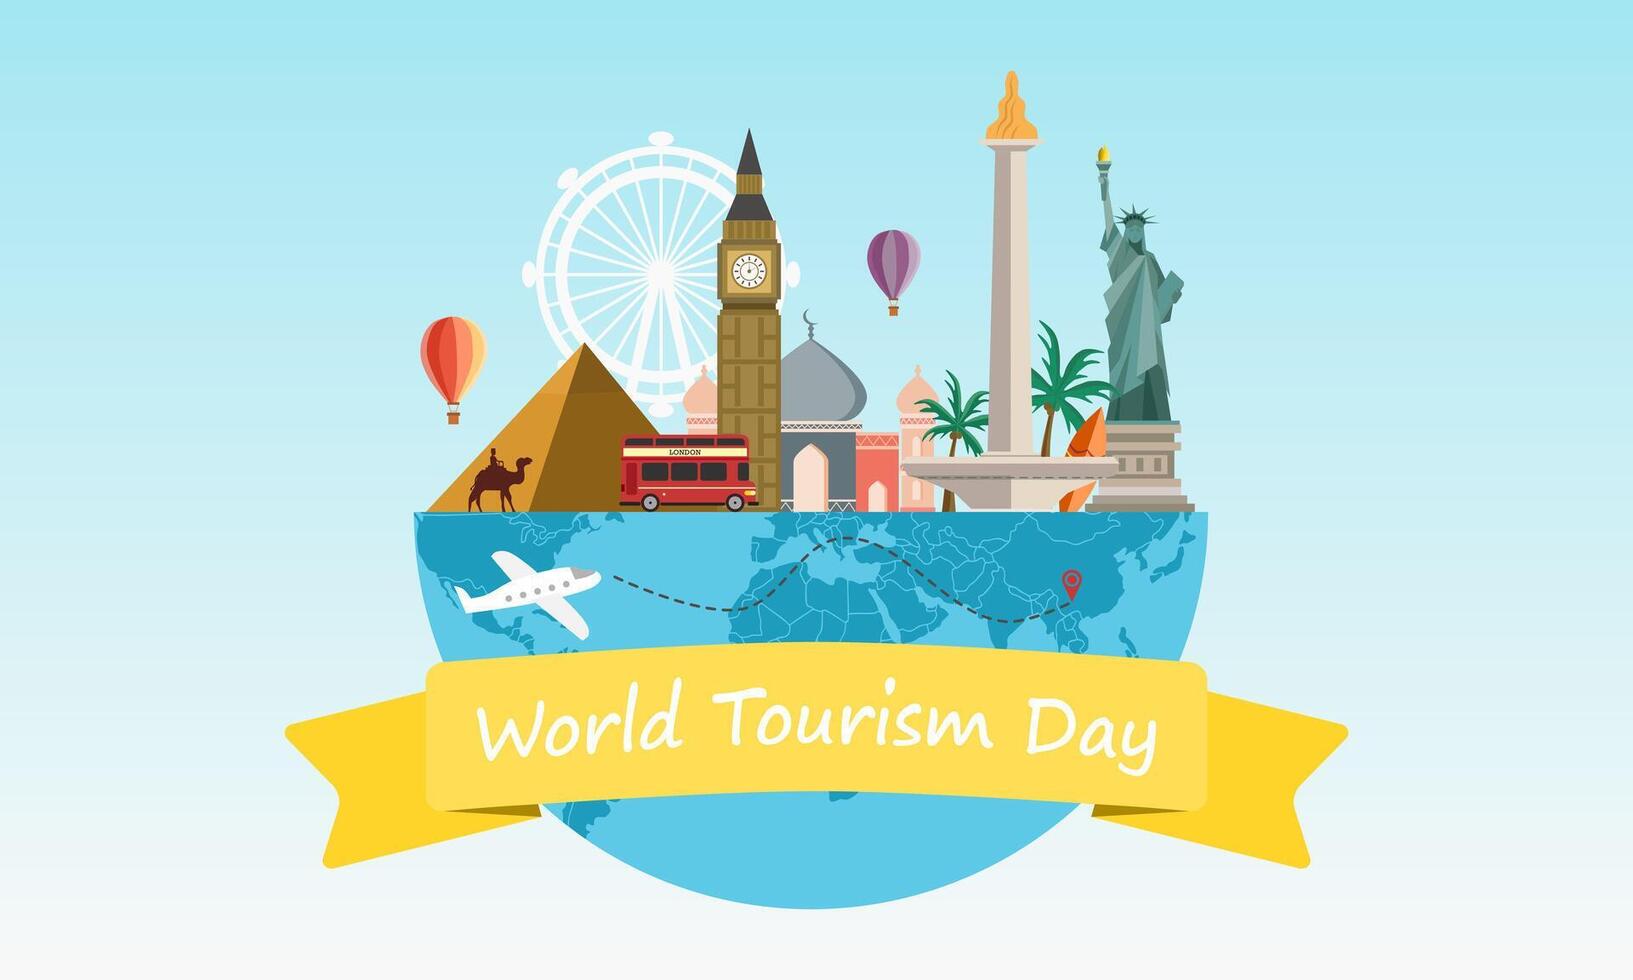 Travel around the world concept with famous world landmarks. World tourism day. Vector illustration.